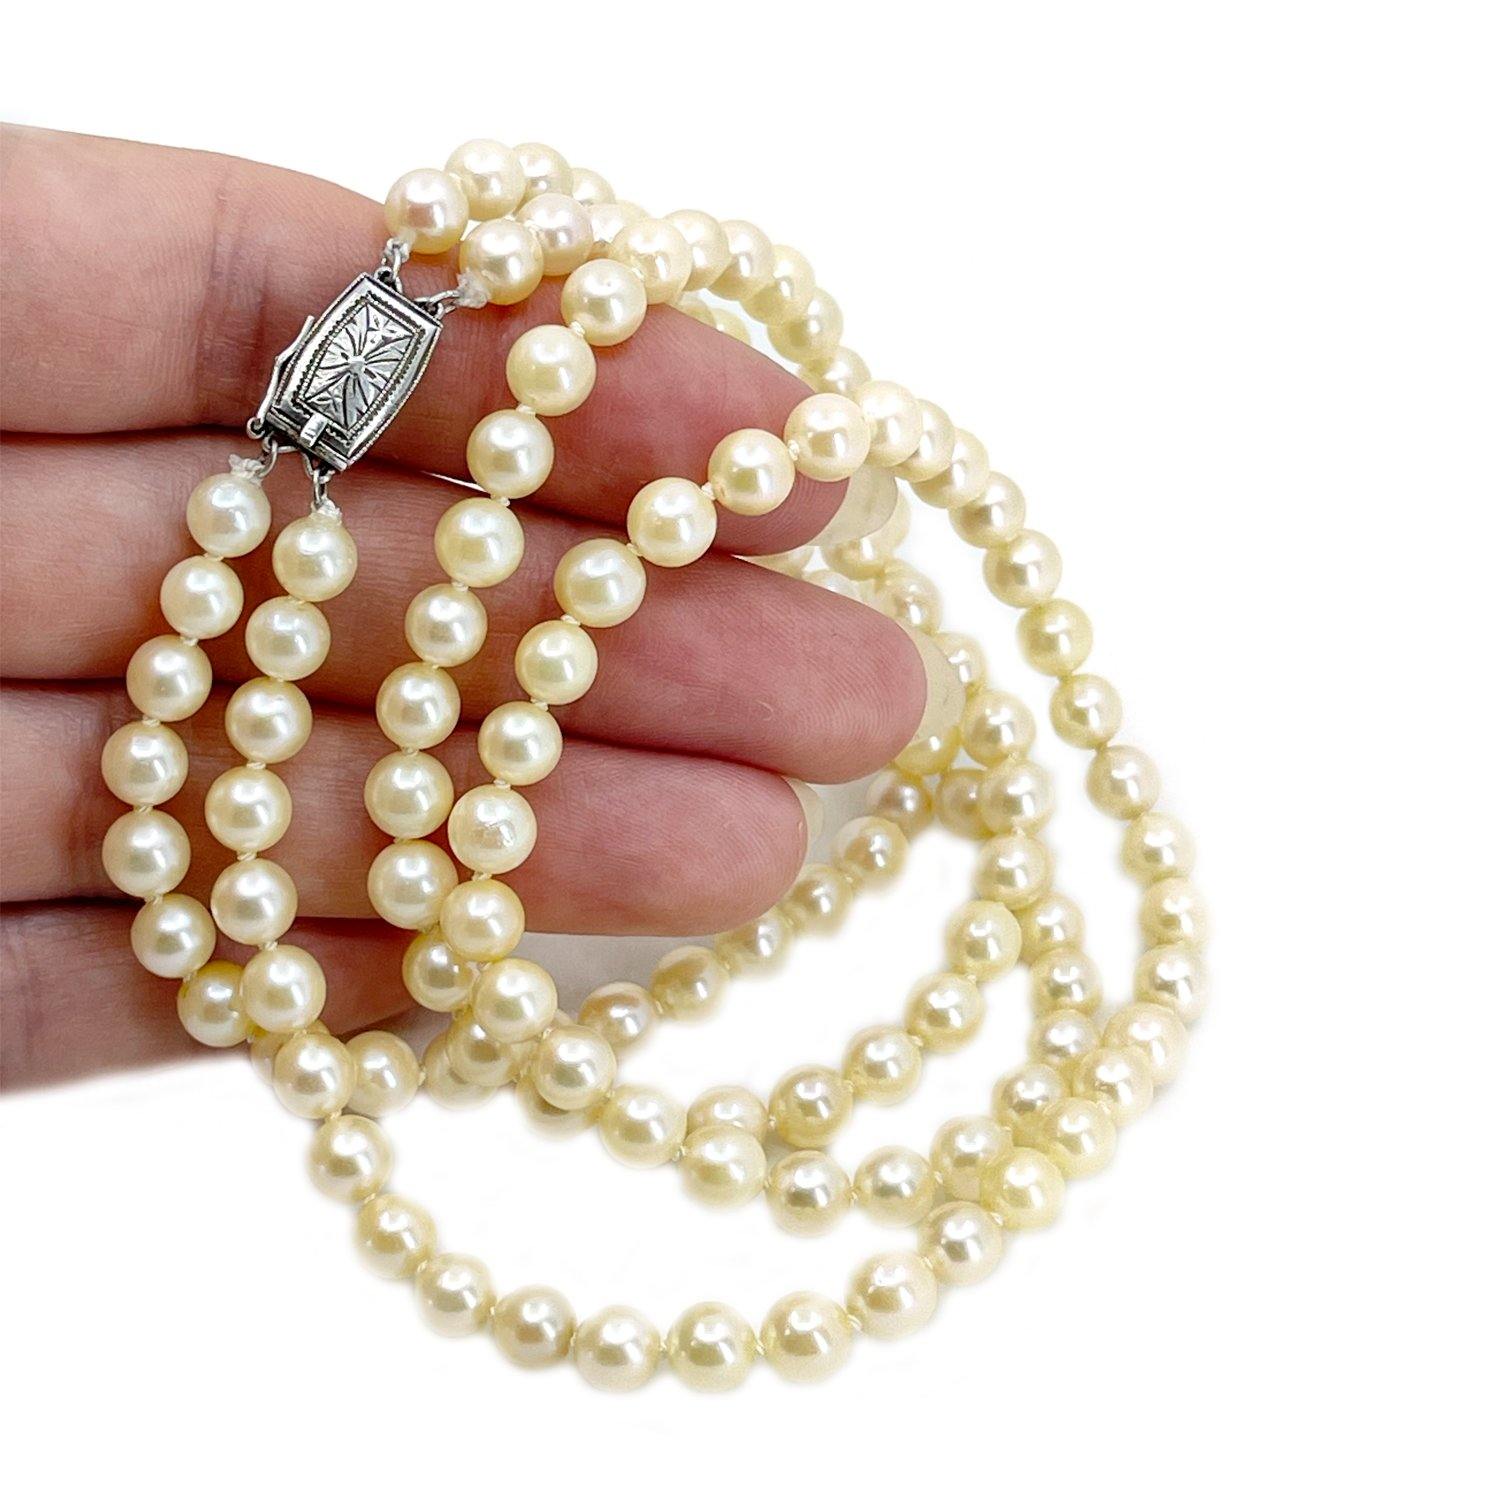 Art Deco Double Strand Pearl Necklace with 14kt Gold, Diamond and Pearl  Clasp — High Style Deco